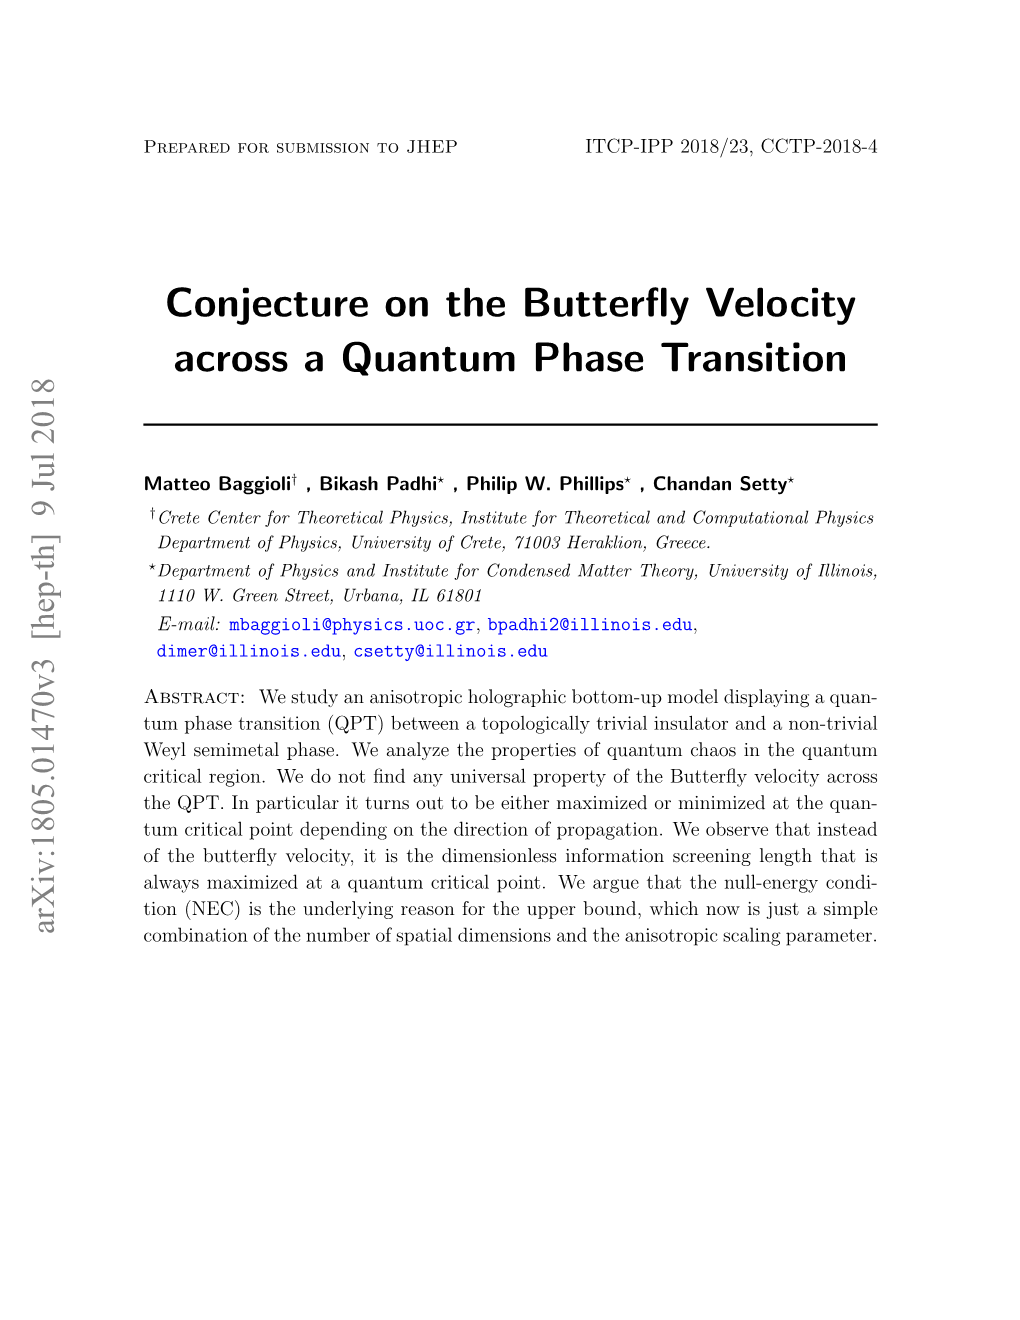 Conjecture on the Butterfly Velocity Across a Quantum Phase Transition